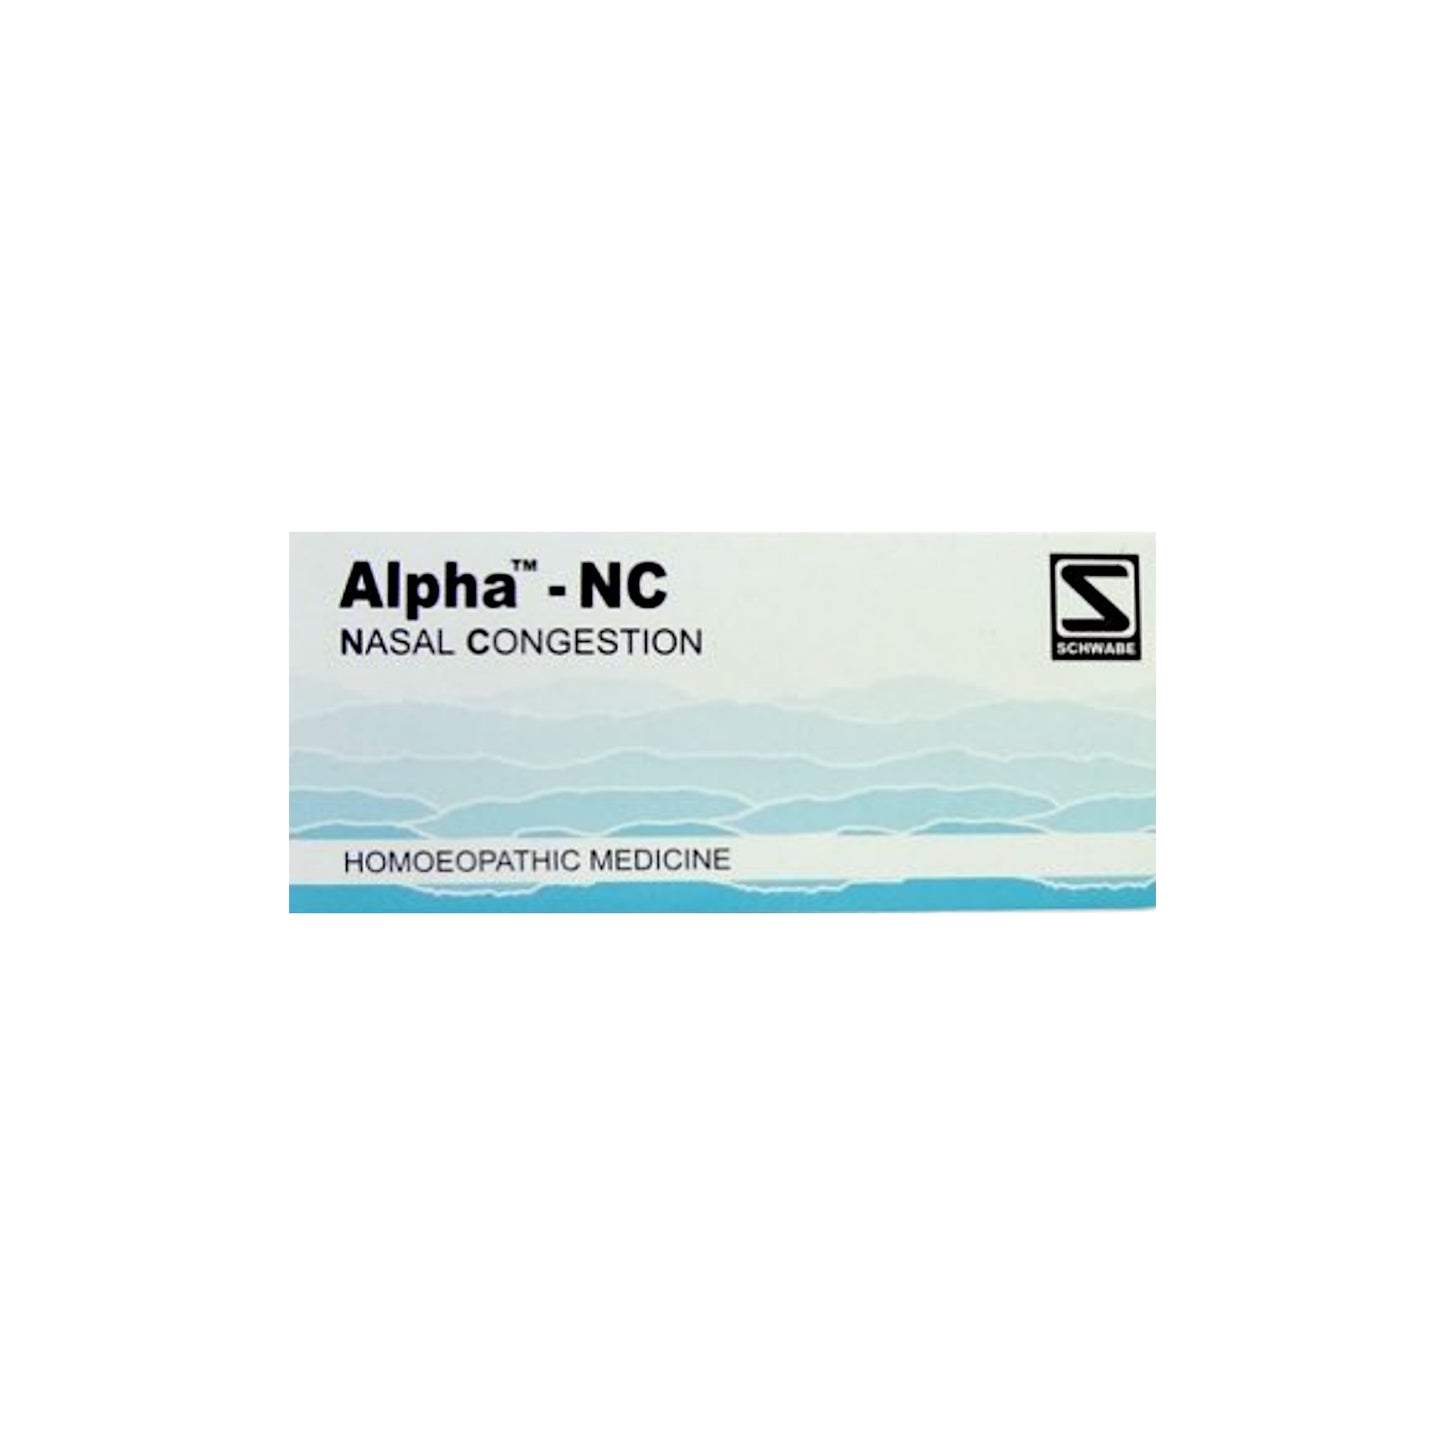 "Image: Dr. Willmar Schwabe Homeopathy - Alpha-NC 40 Tablets - Relieves congestion, sneezing, headaches, and prevents recurrences."